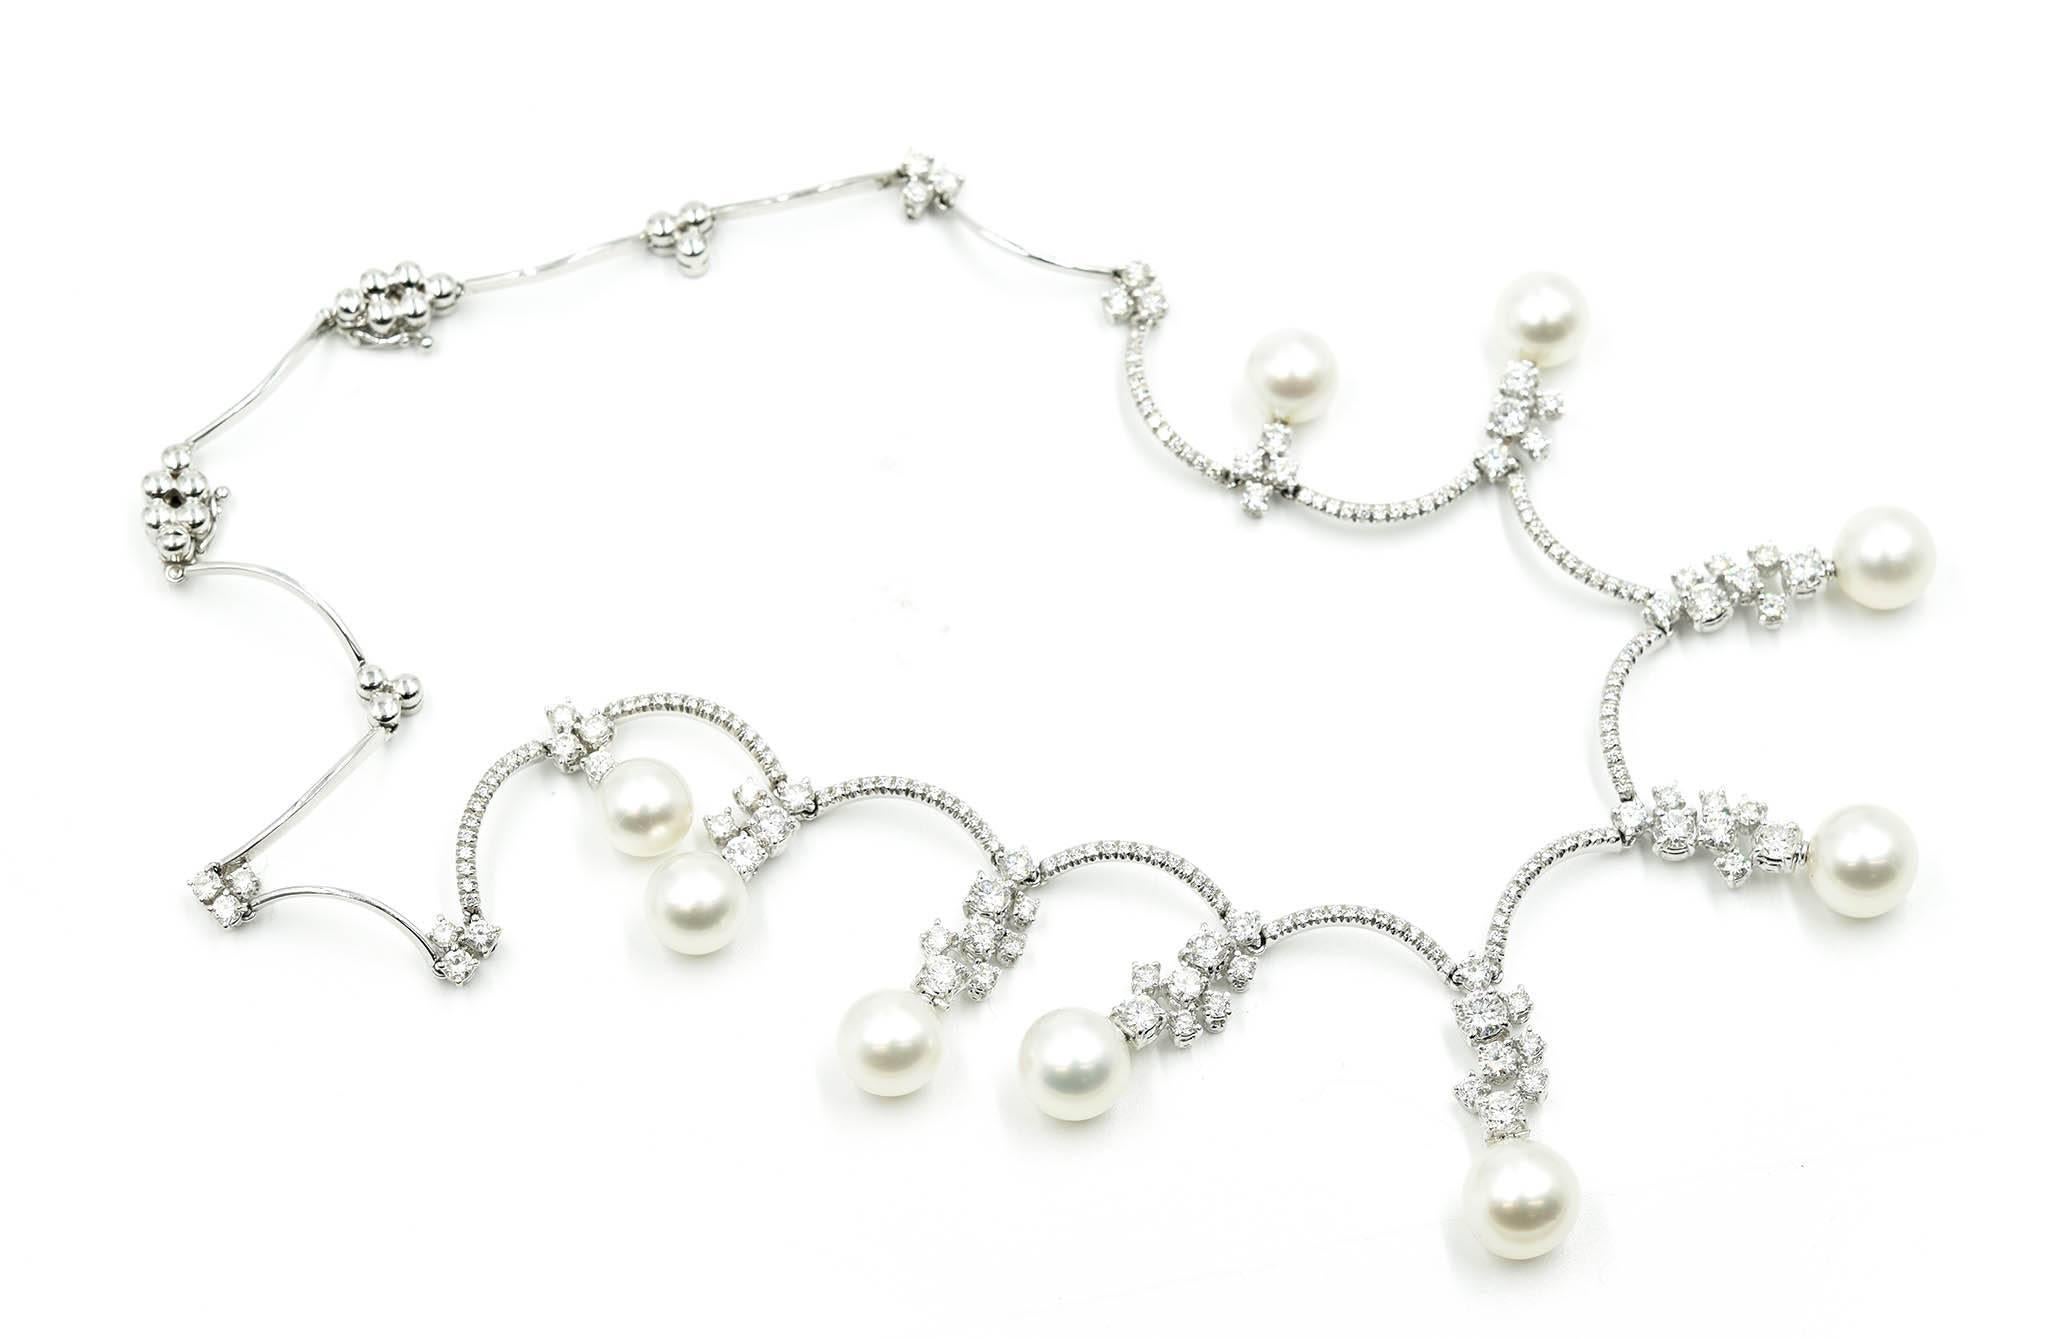 This beautiful necklace is designer in 18k white gold by Stefan Hafner. The necklace is set with 6.00cttw round brilliant diamonds and beautiful natural white pearls. The diamonds are graded G-H in color and VS-SI in clarity. The pearls range in